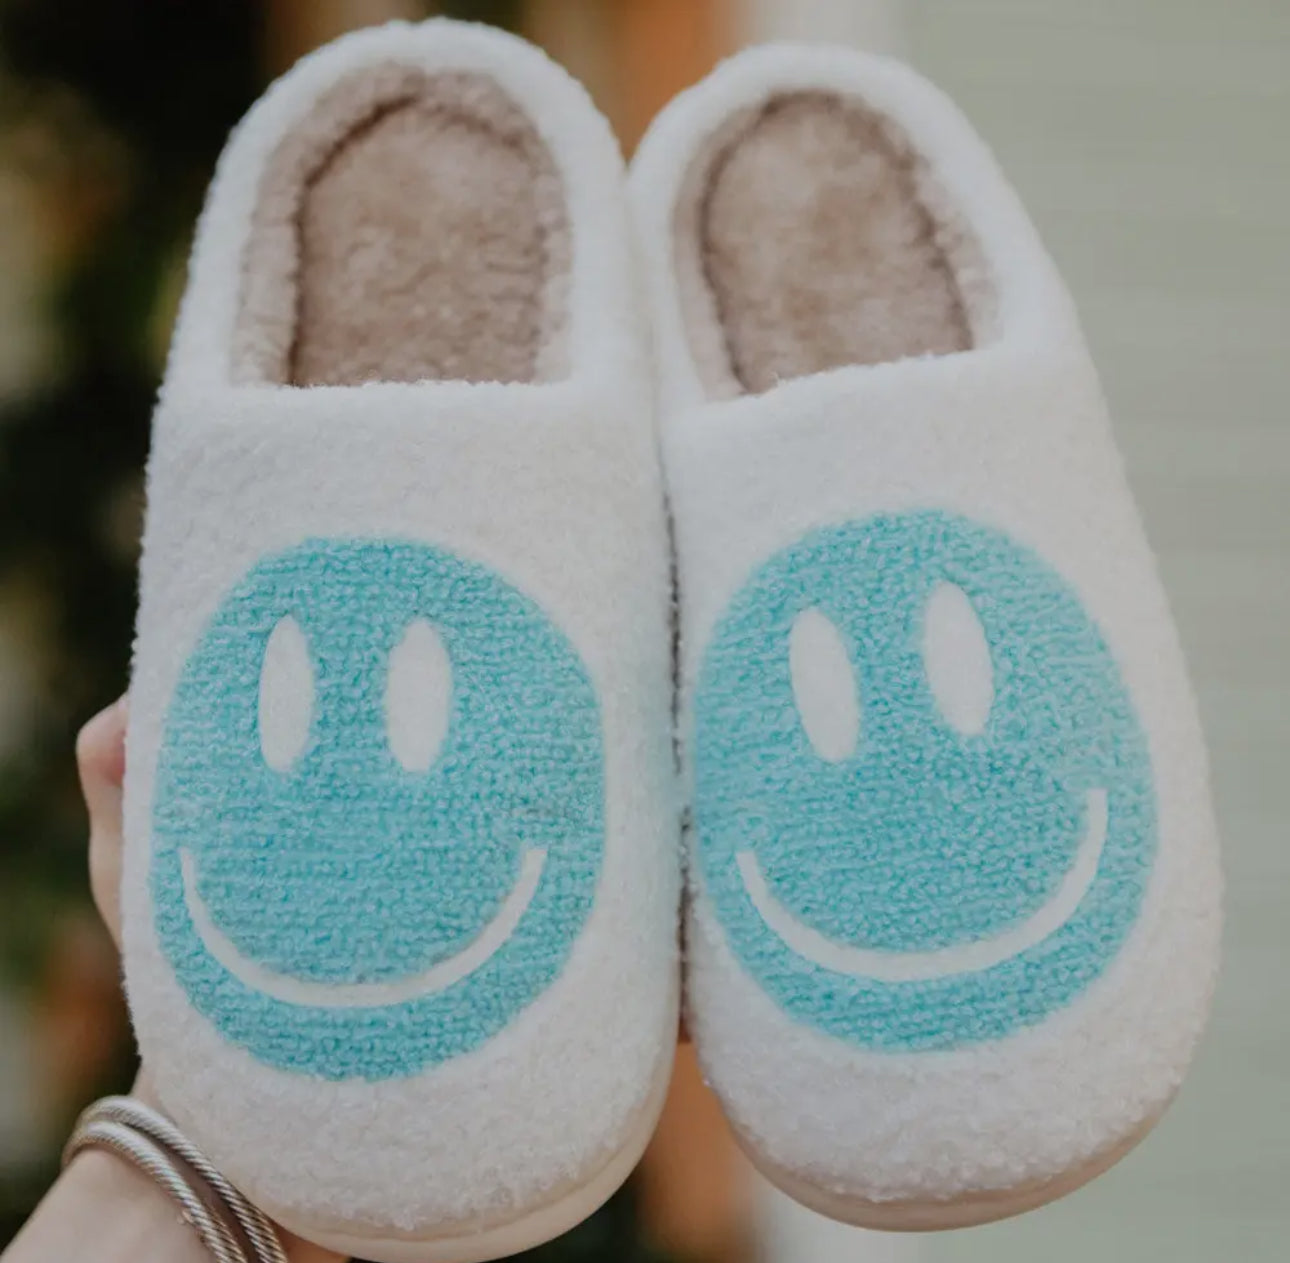 Women’s Smiley Face Slippers